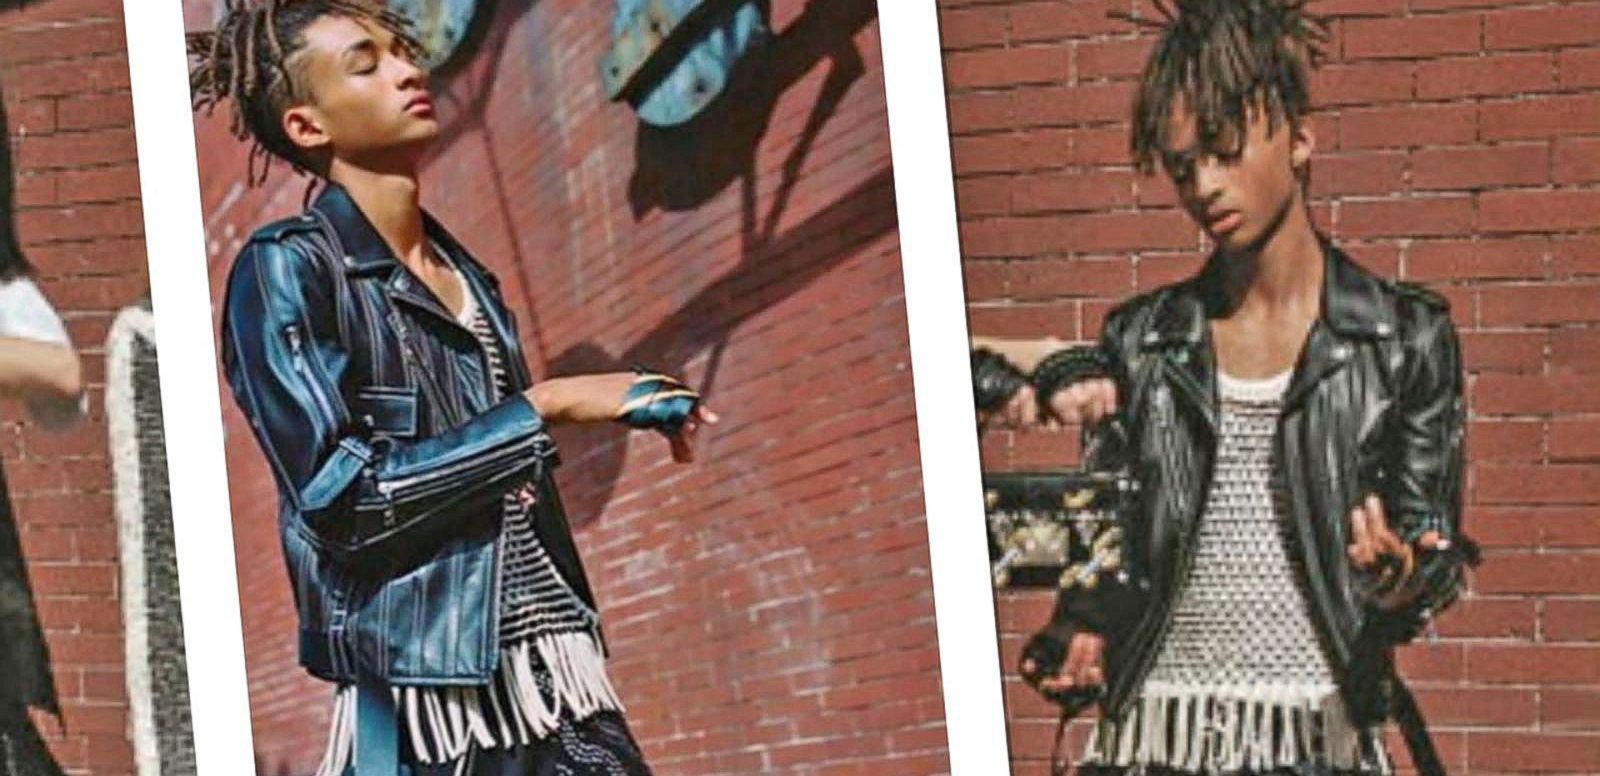 Jaden Smith Sports Skirt for Louis Vuitton&#39;s Womenswear Campaign - ABC News